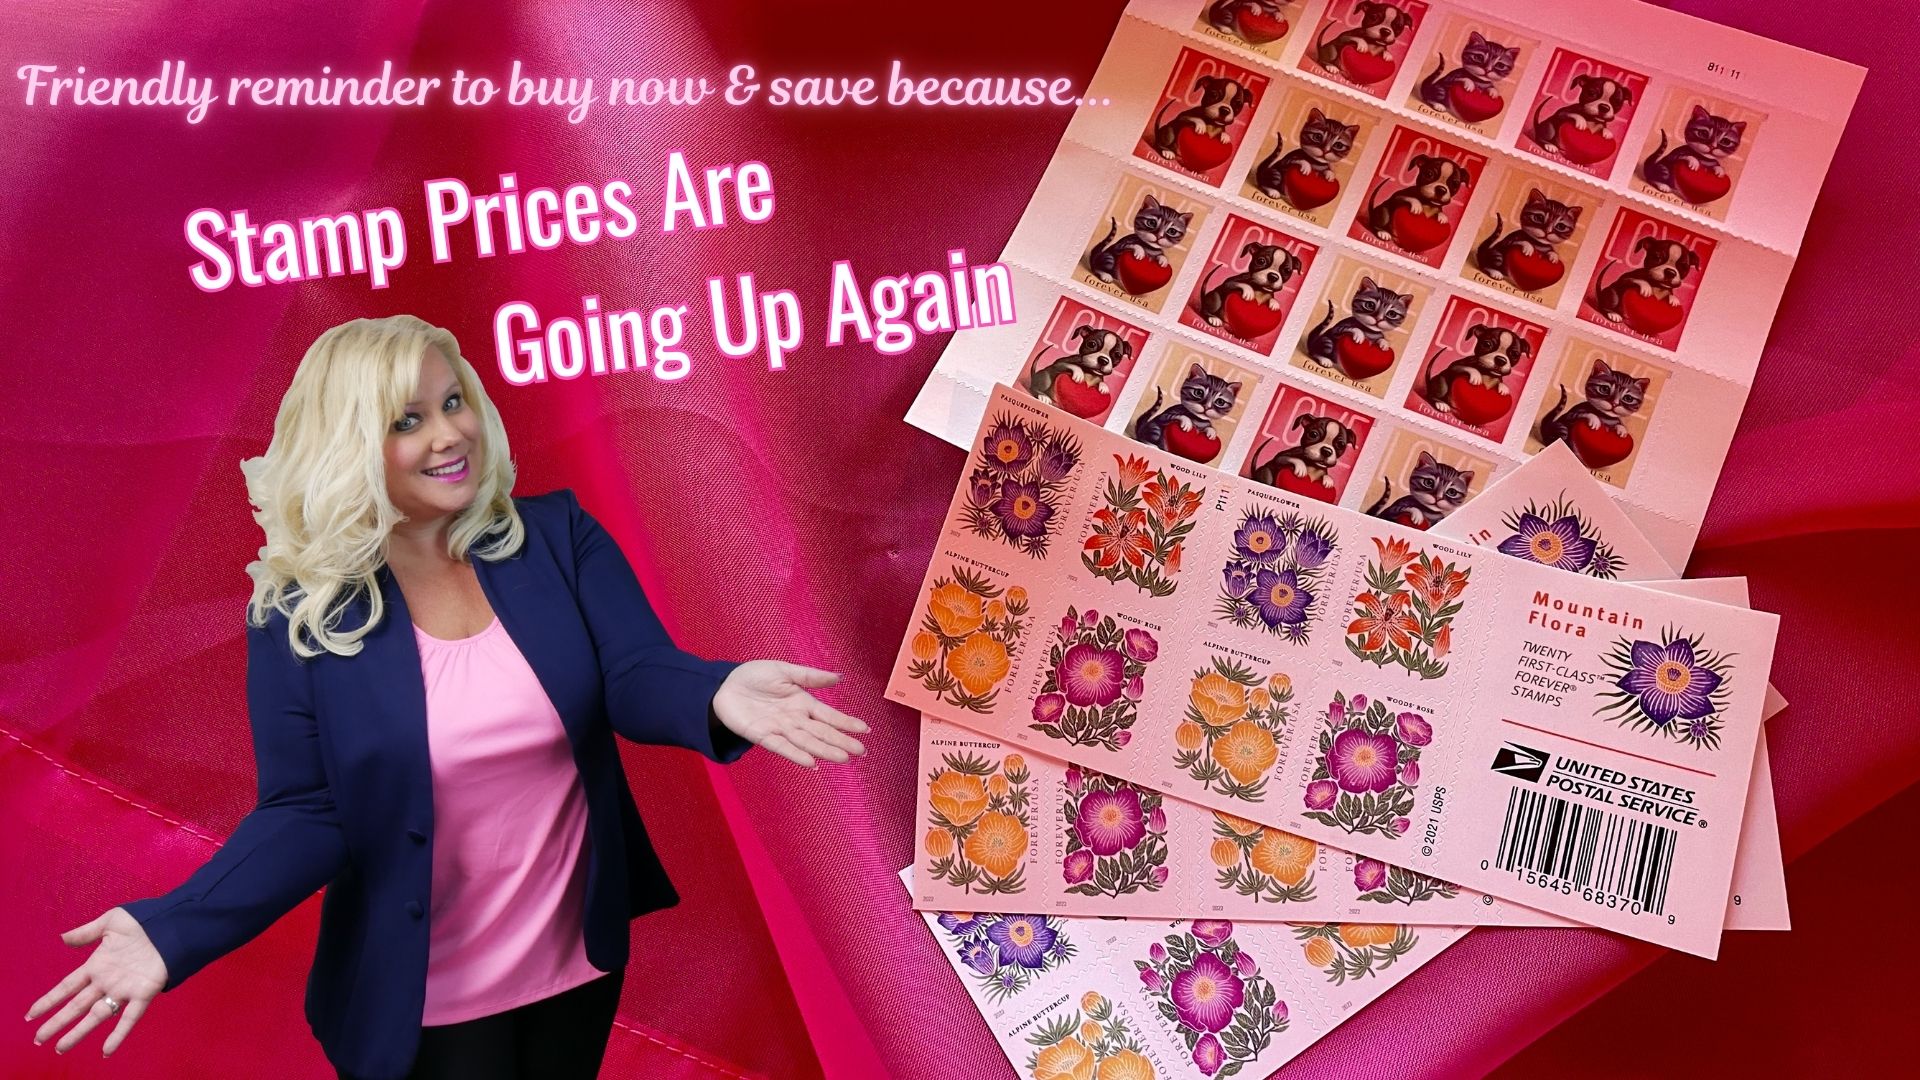 Few days left to save on stamps!